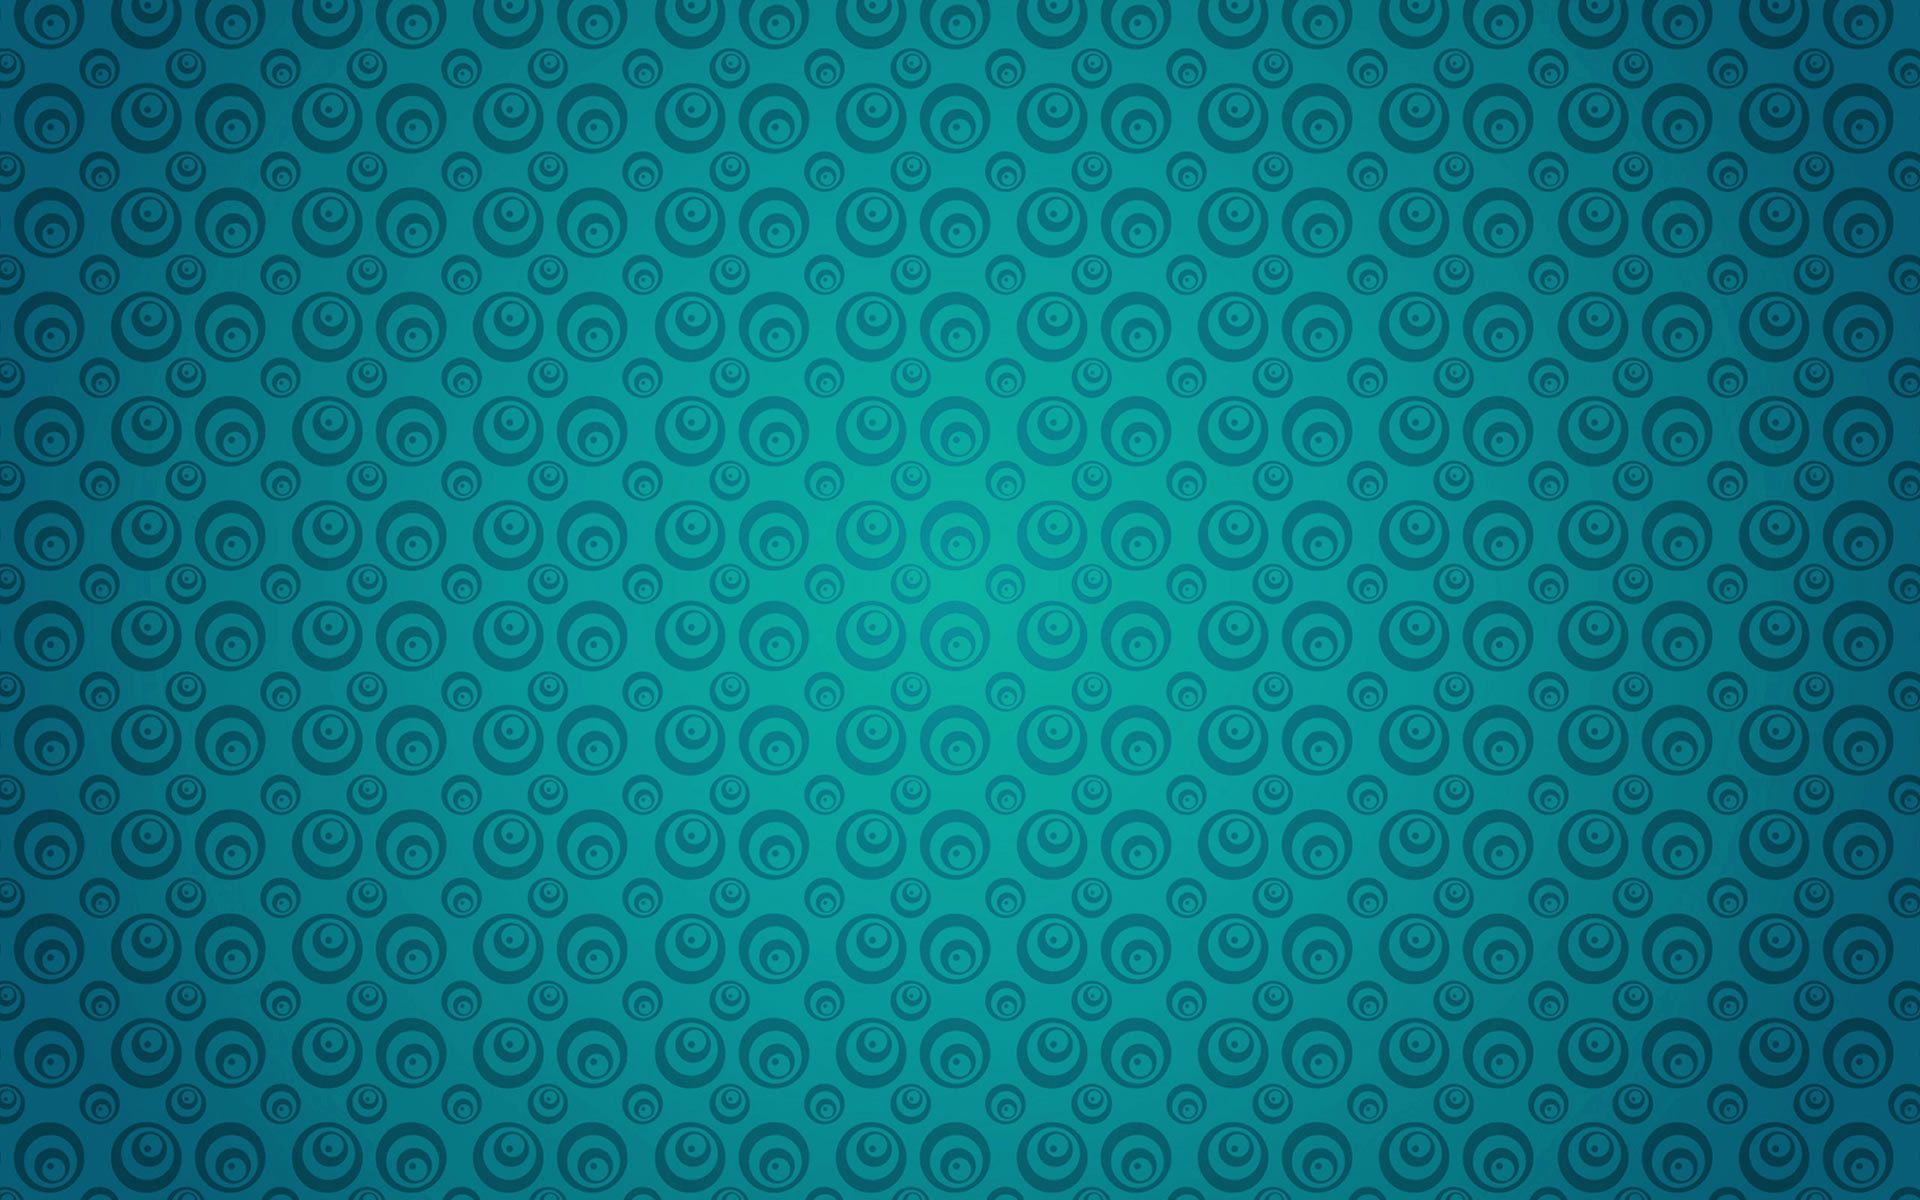 New Lock Screen Wallpapers patterns, turquoise, circles, texture, textures, surface